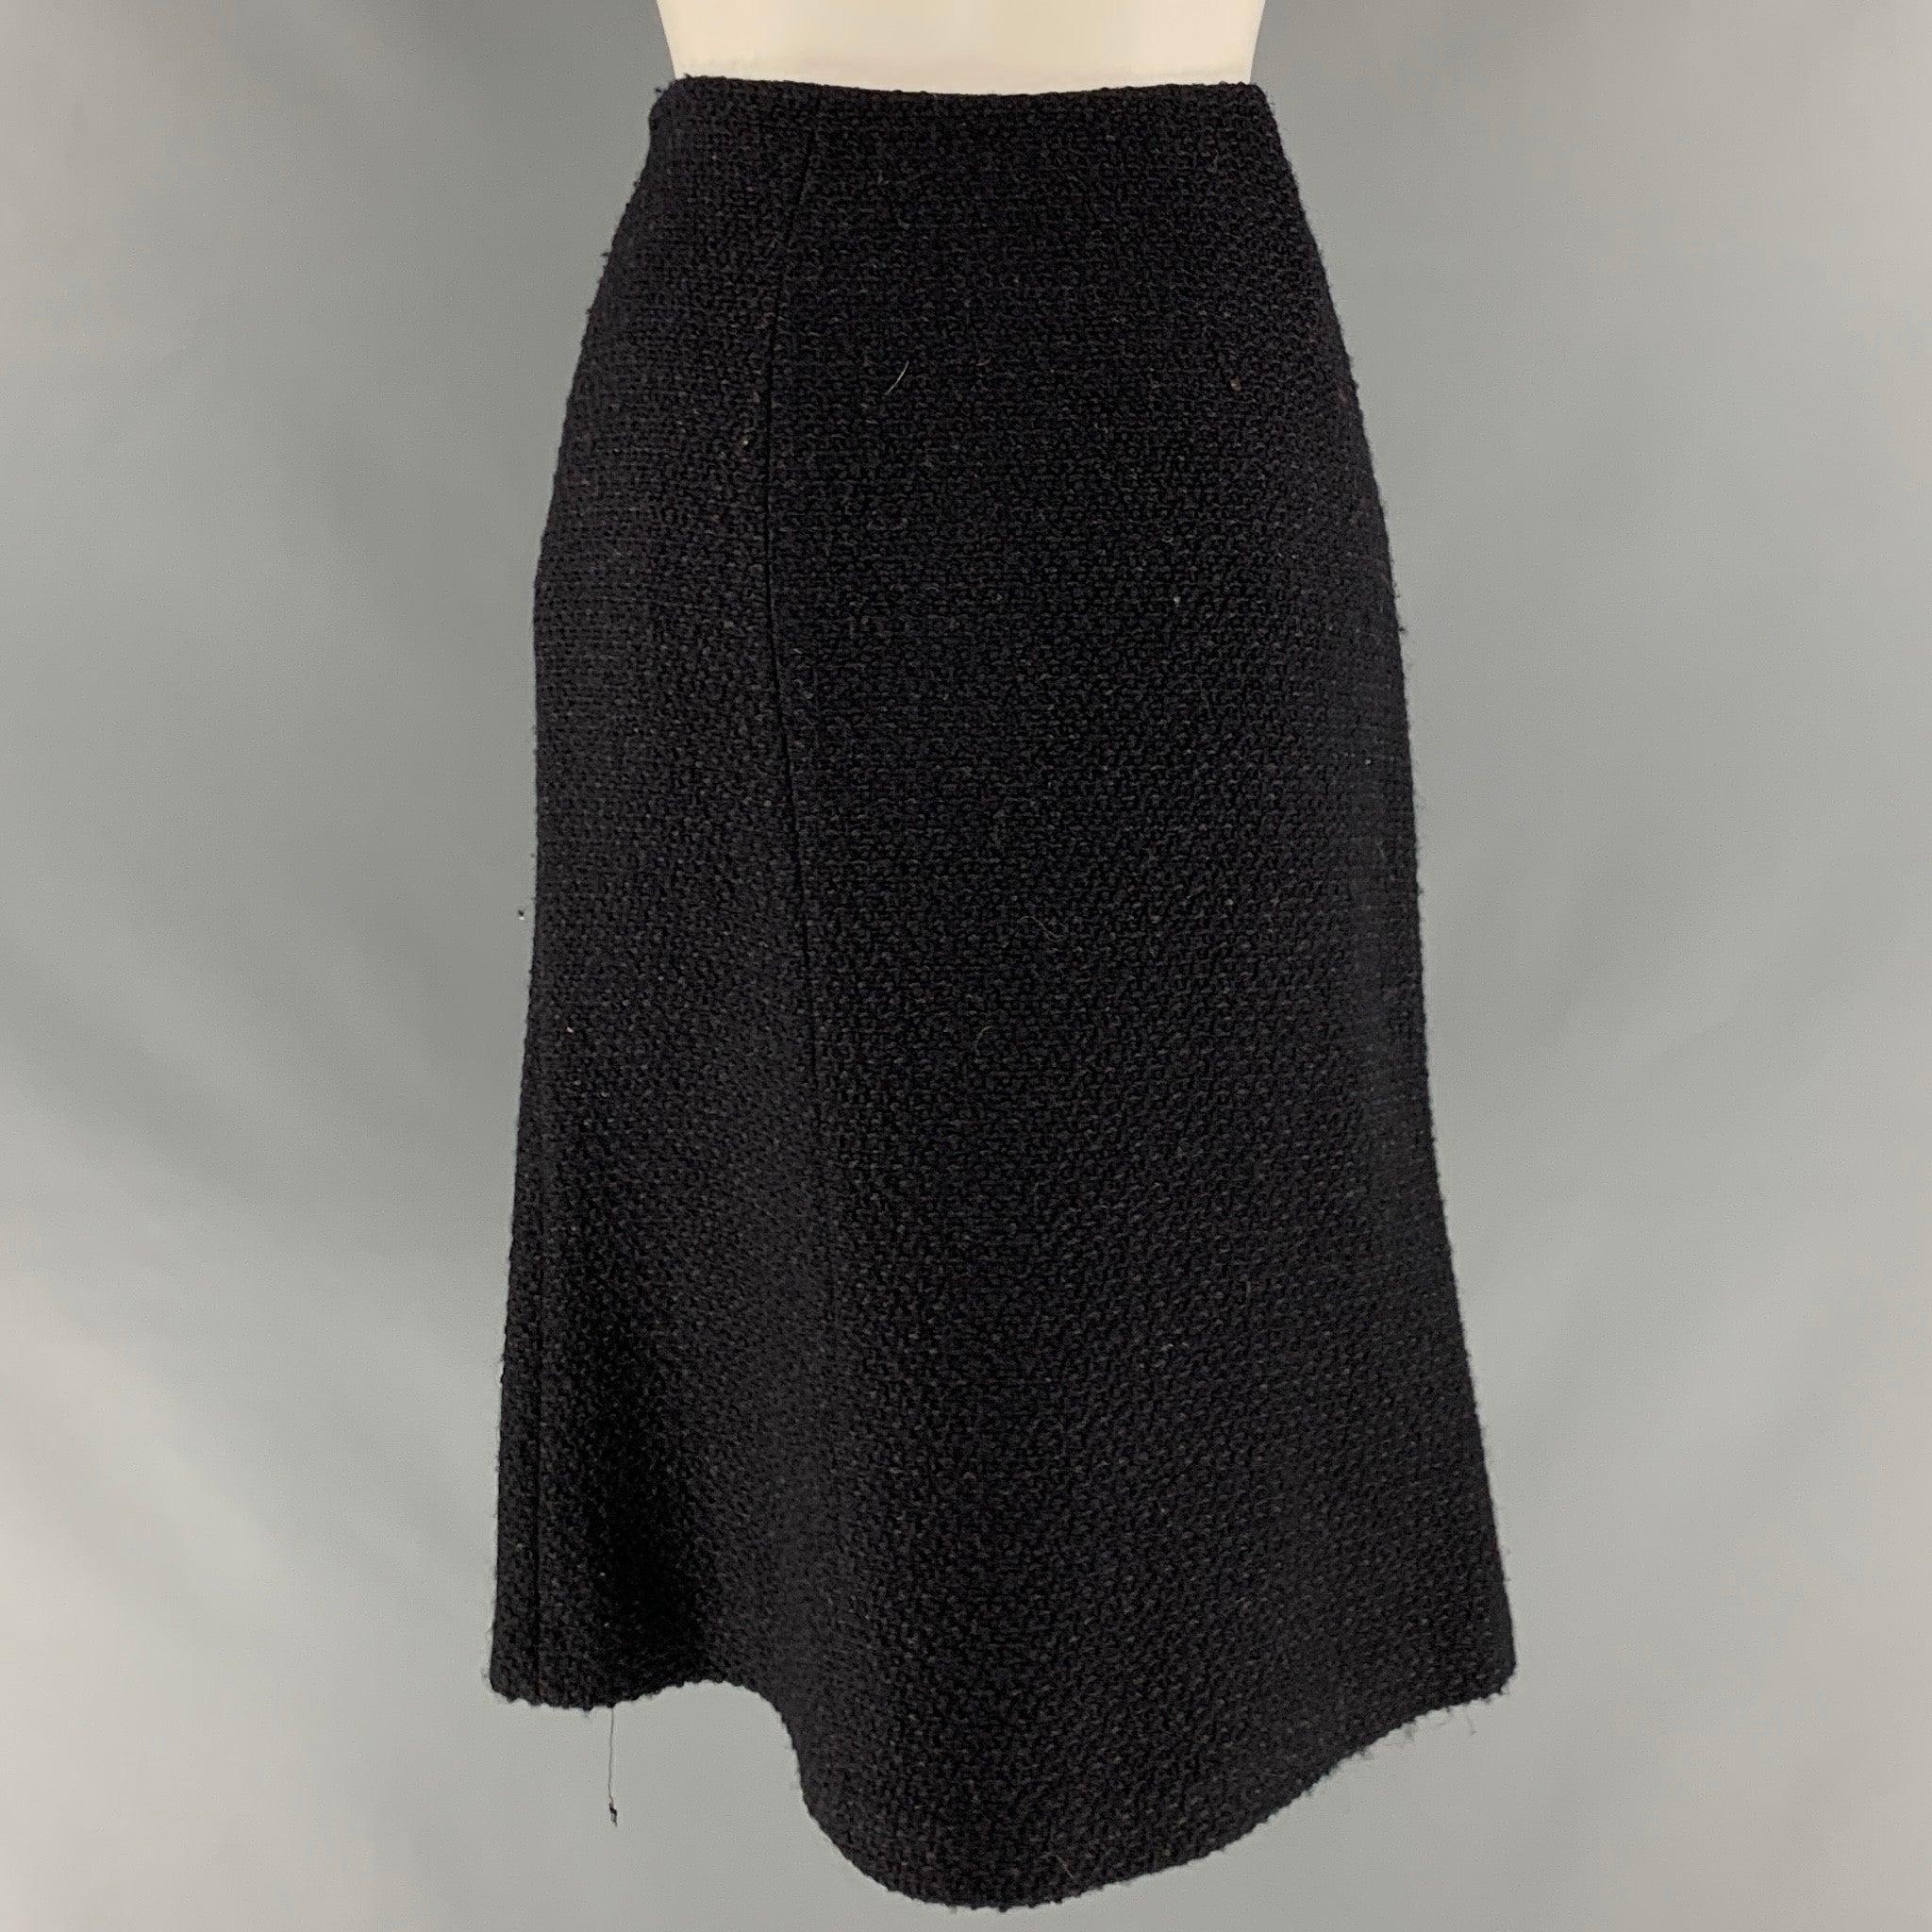 DEREK LAM Size 28 Black Textured A-Line Knee-Length Skirt In Good Condition For Sale In San Francisco, CA